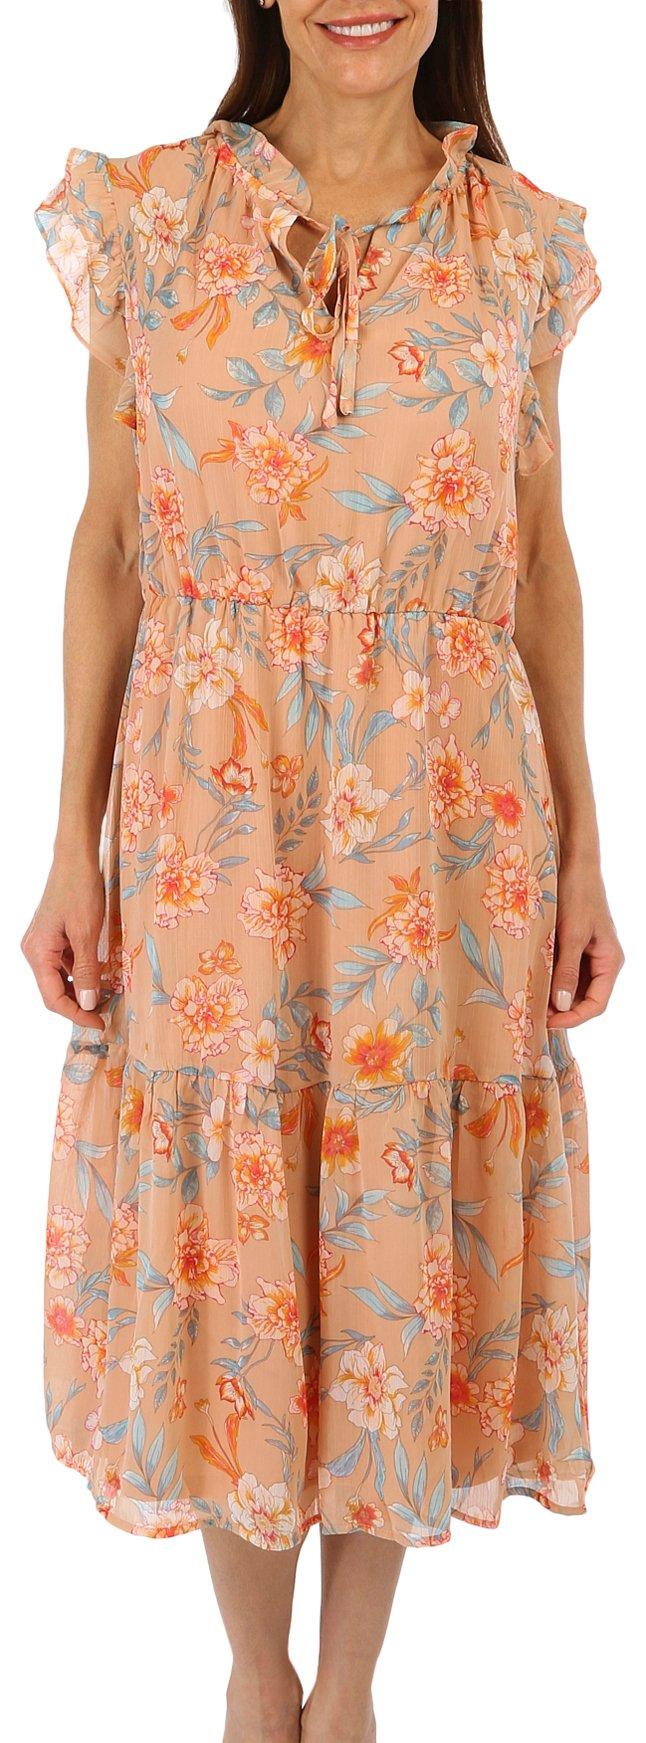 Womens Floral Print Lace Front Tiered Short Sleeve Dress